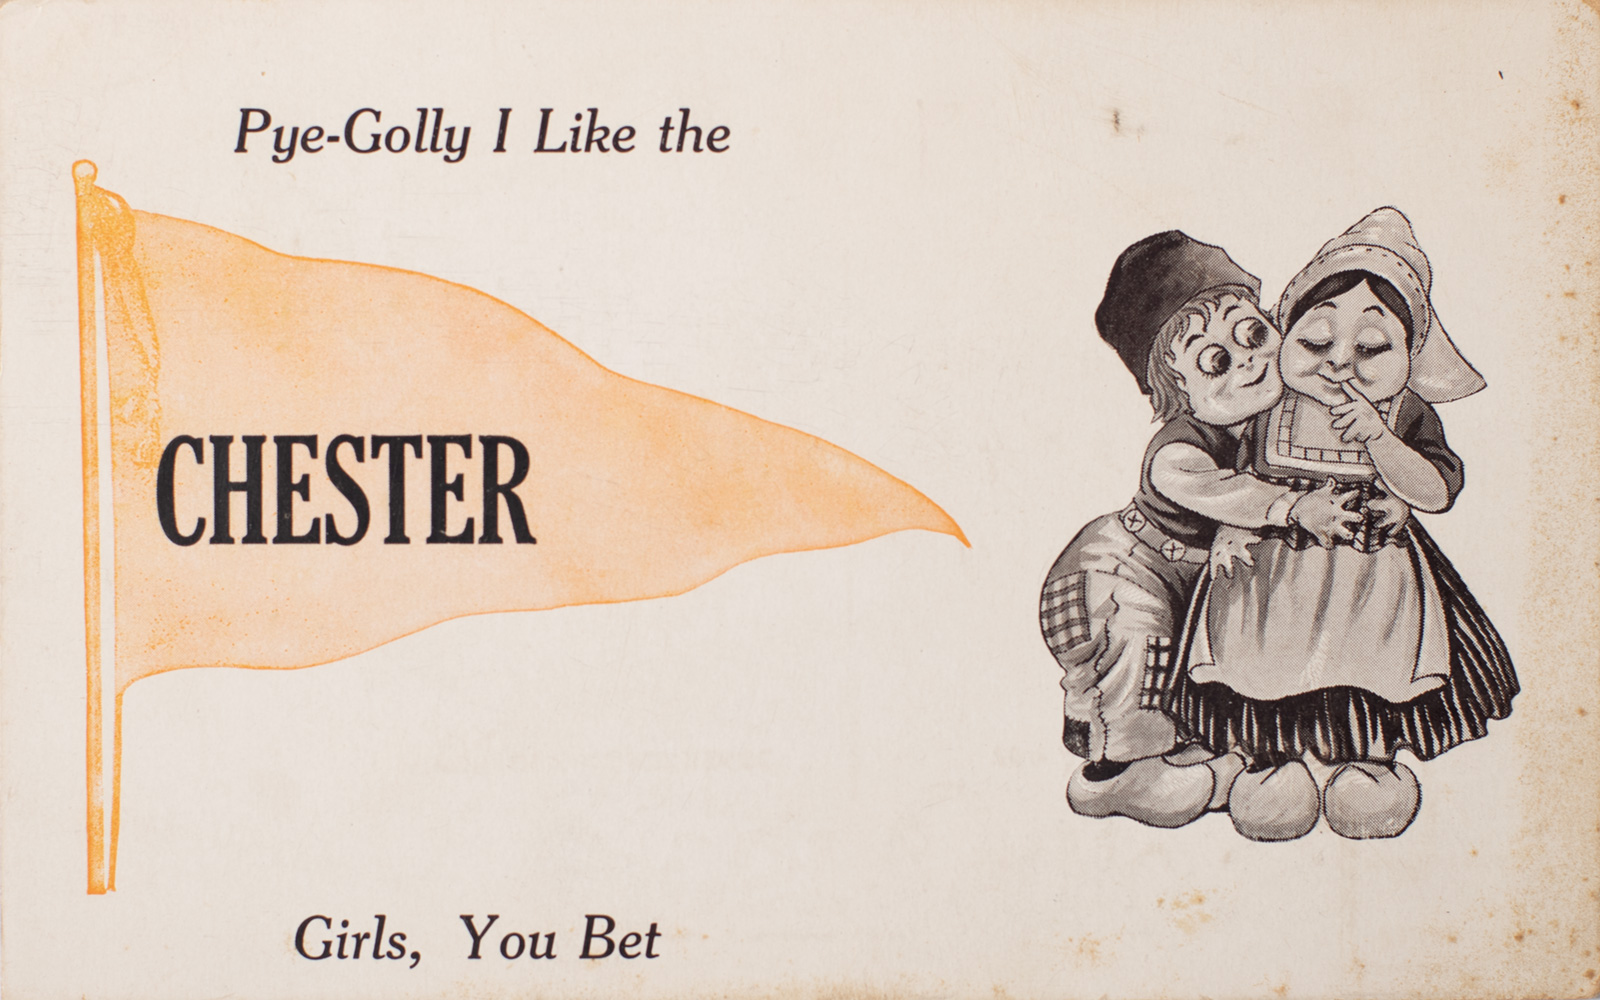 Pye-Golly I Like the Chester Girls, You Bet - 1913 Postcard main image